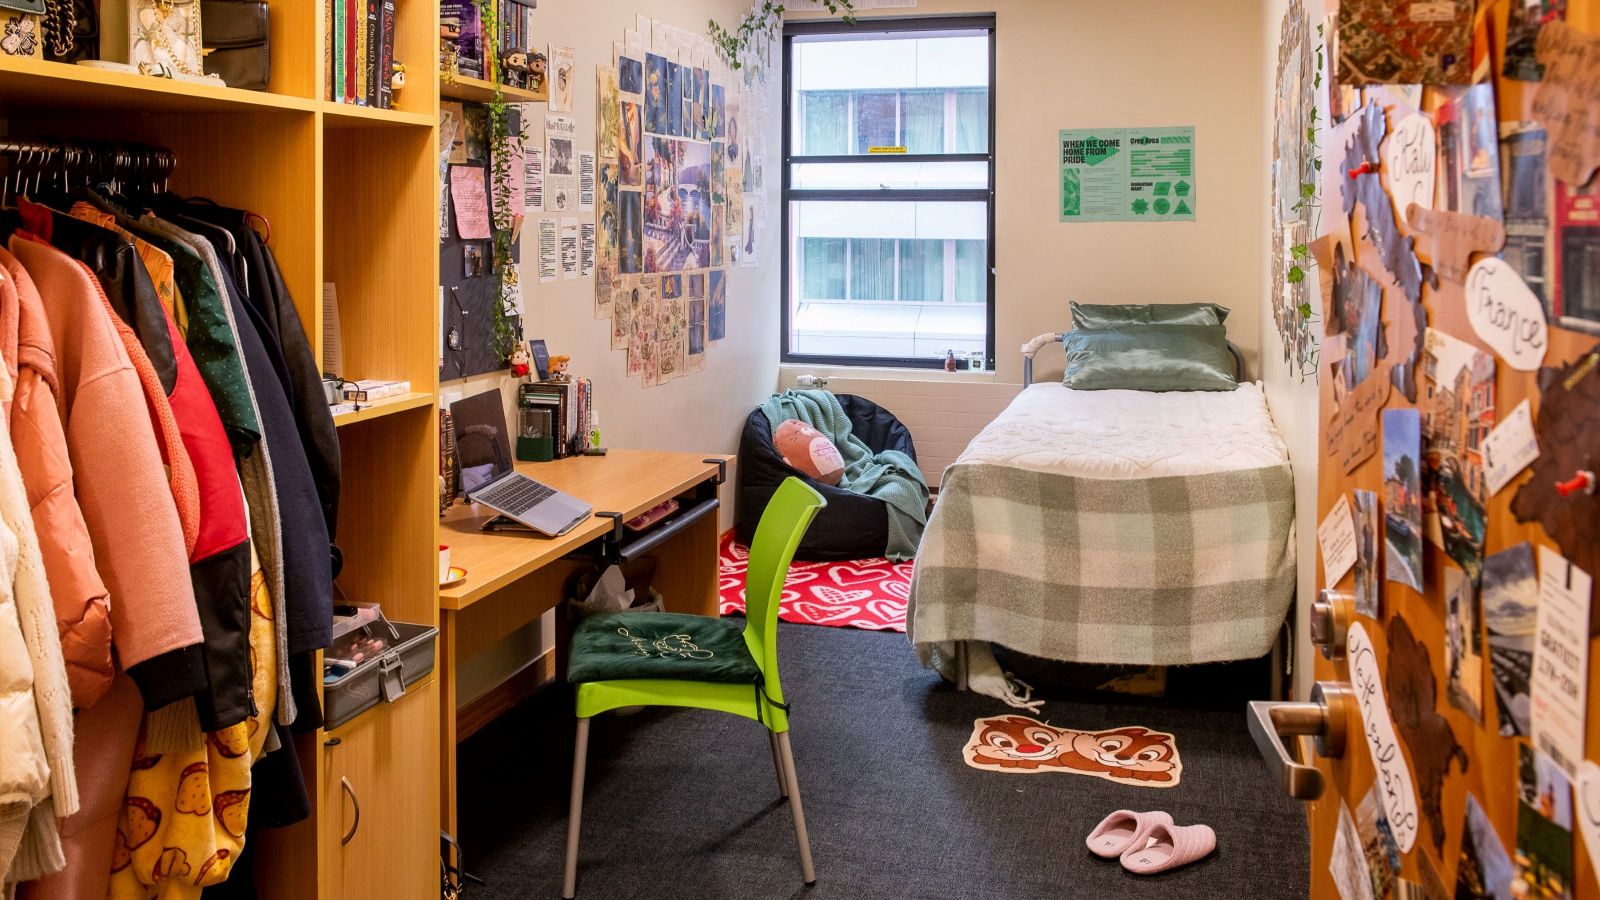 Single room at Joan Stevens Hall, with a bed, desk and chair, and wardrobe unit.